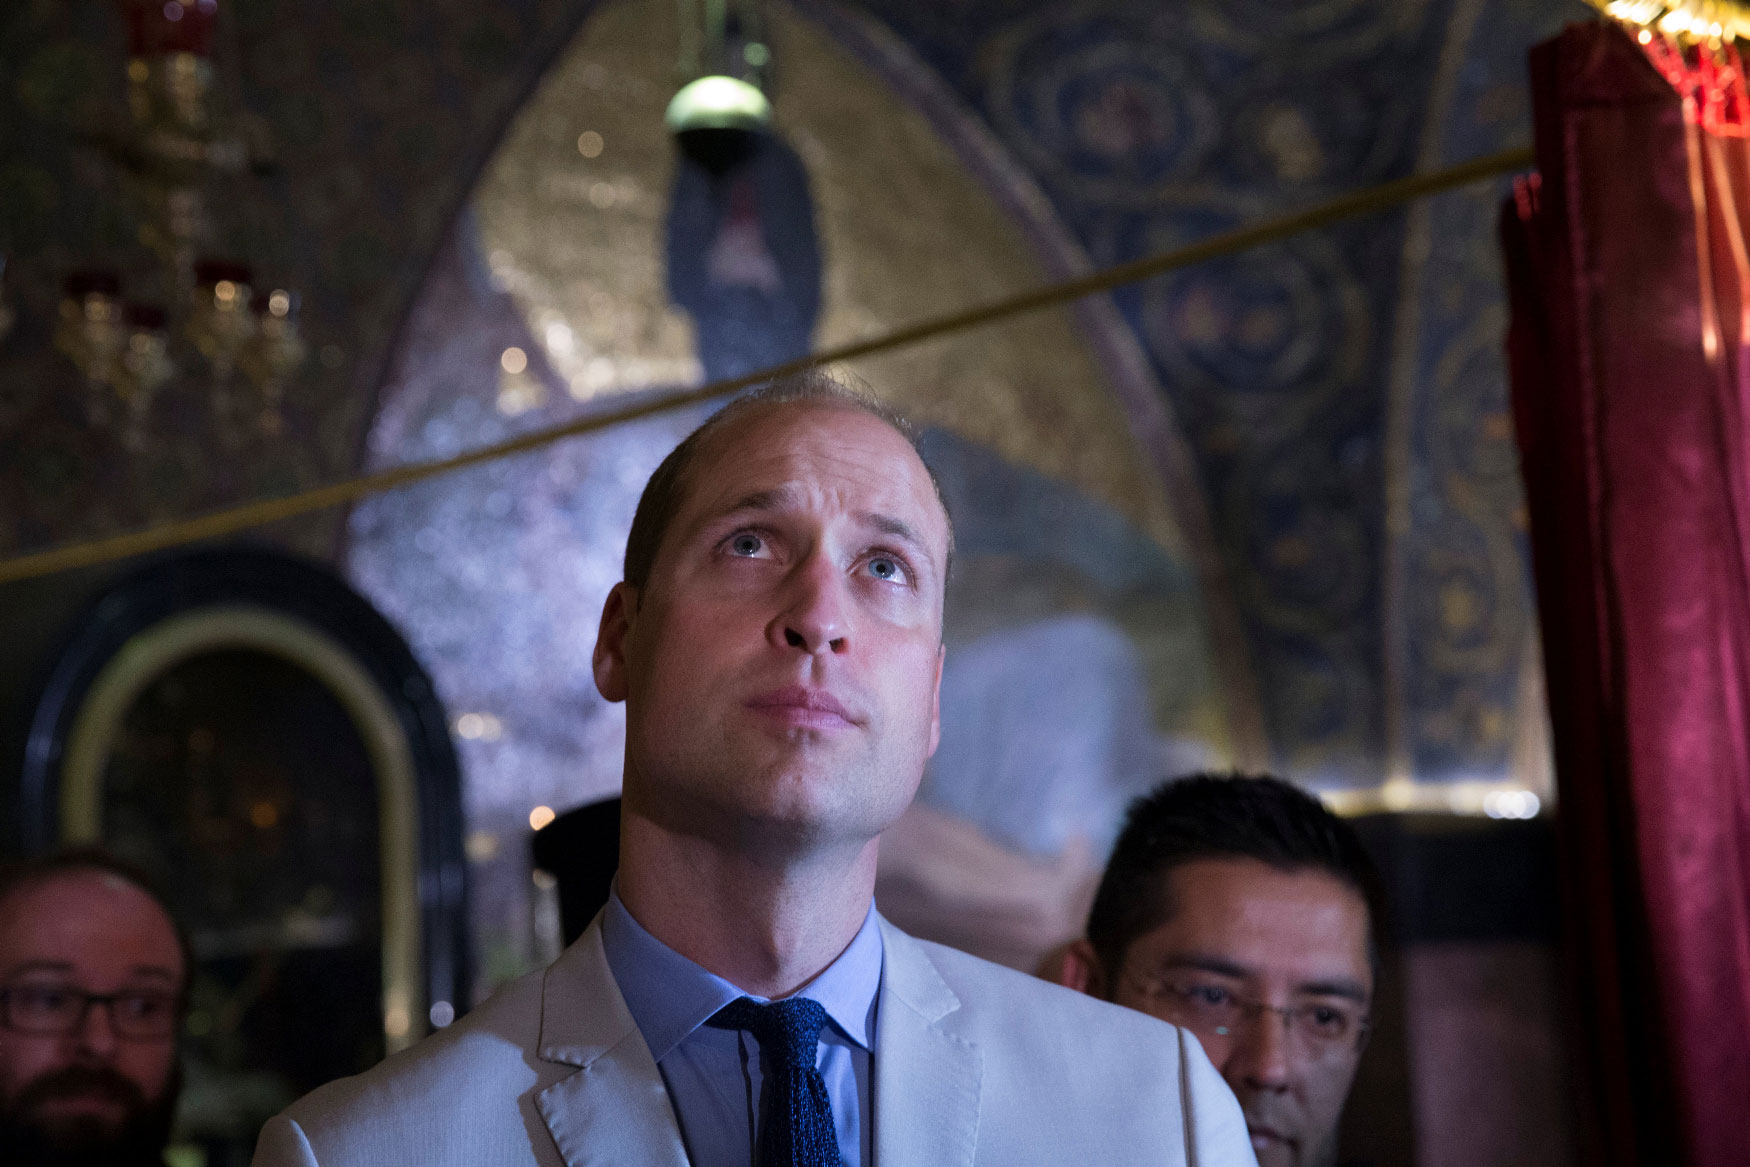 Britain's Prince William visits the Church of the Holy Sepulchre in Jerusalem's Old City, June 28, 2018.